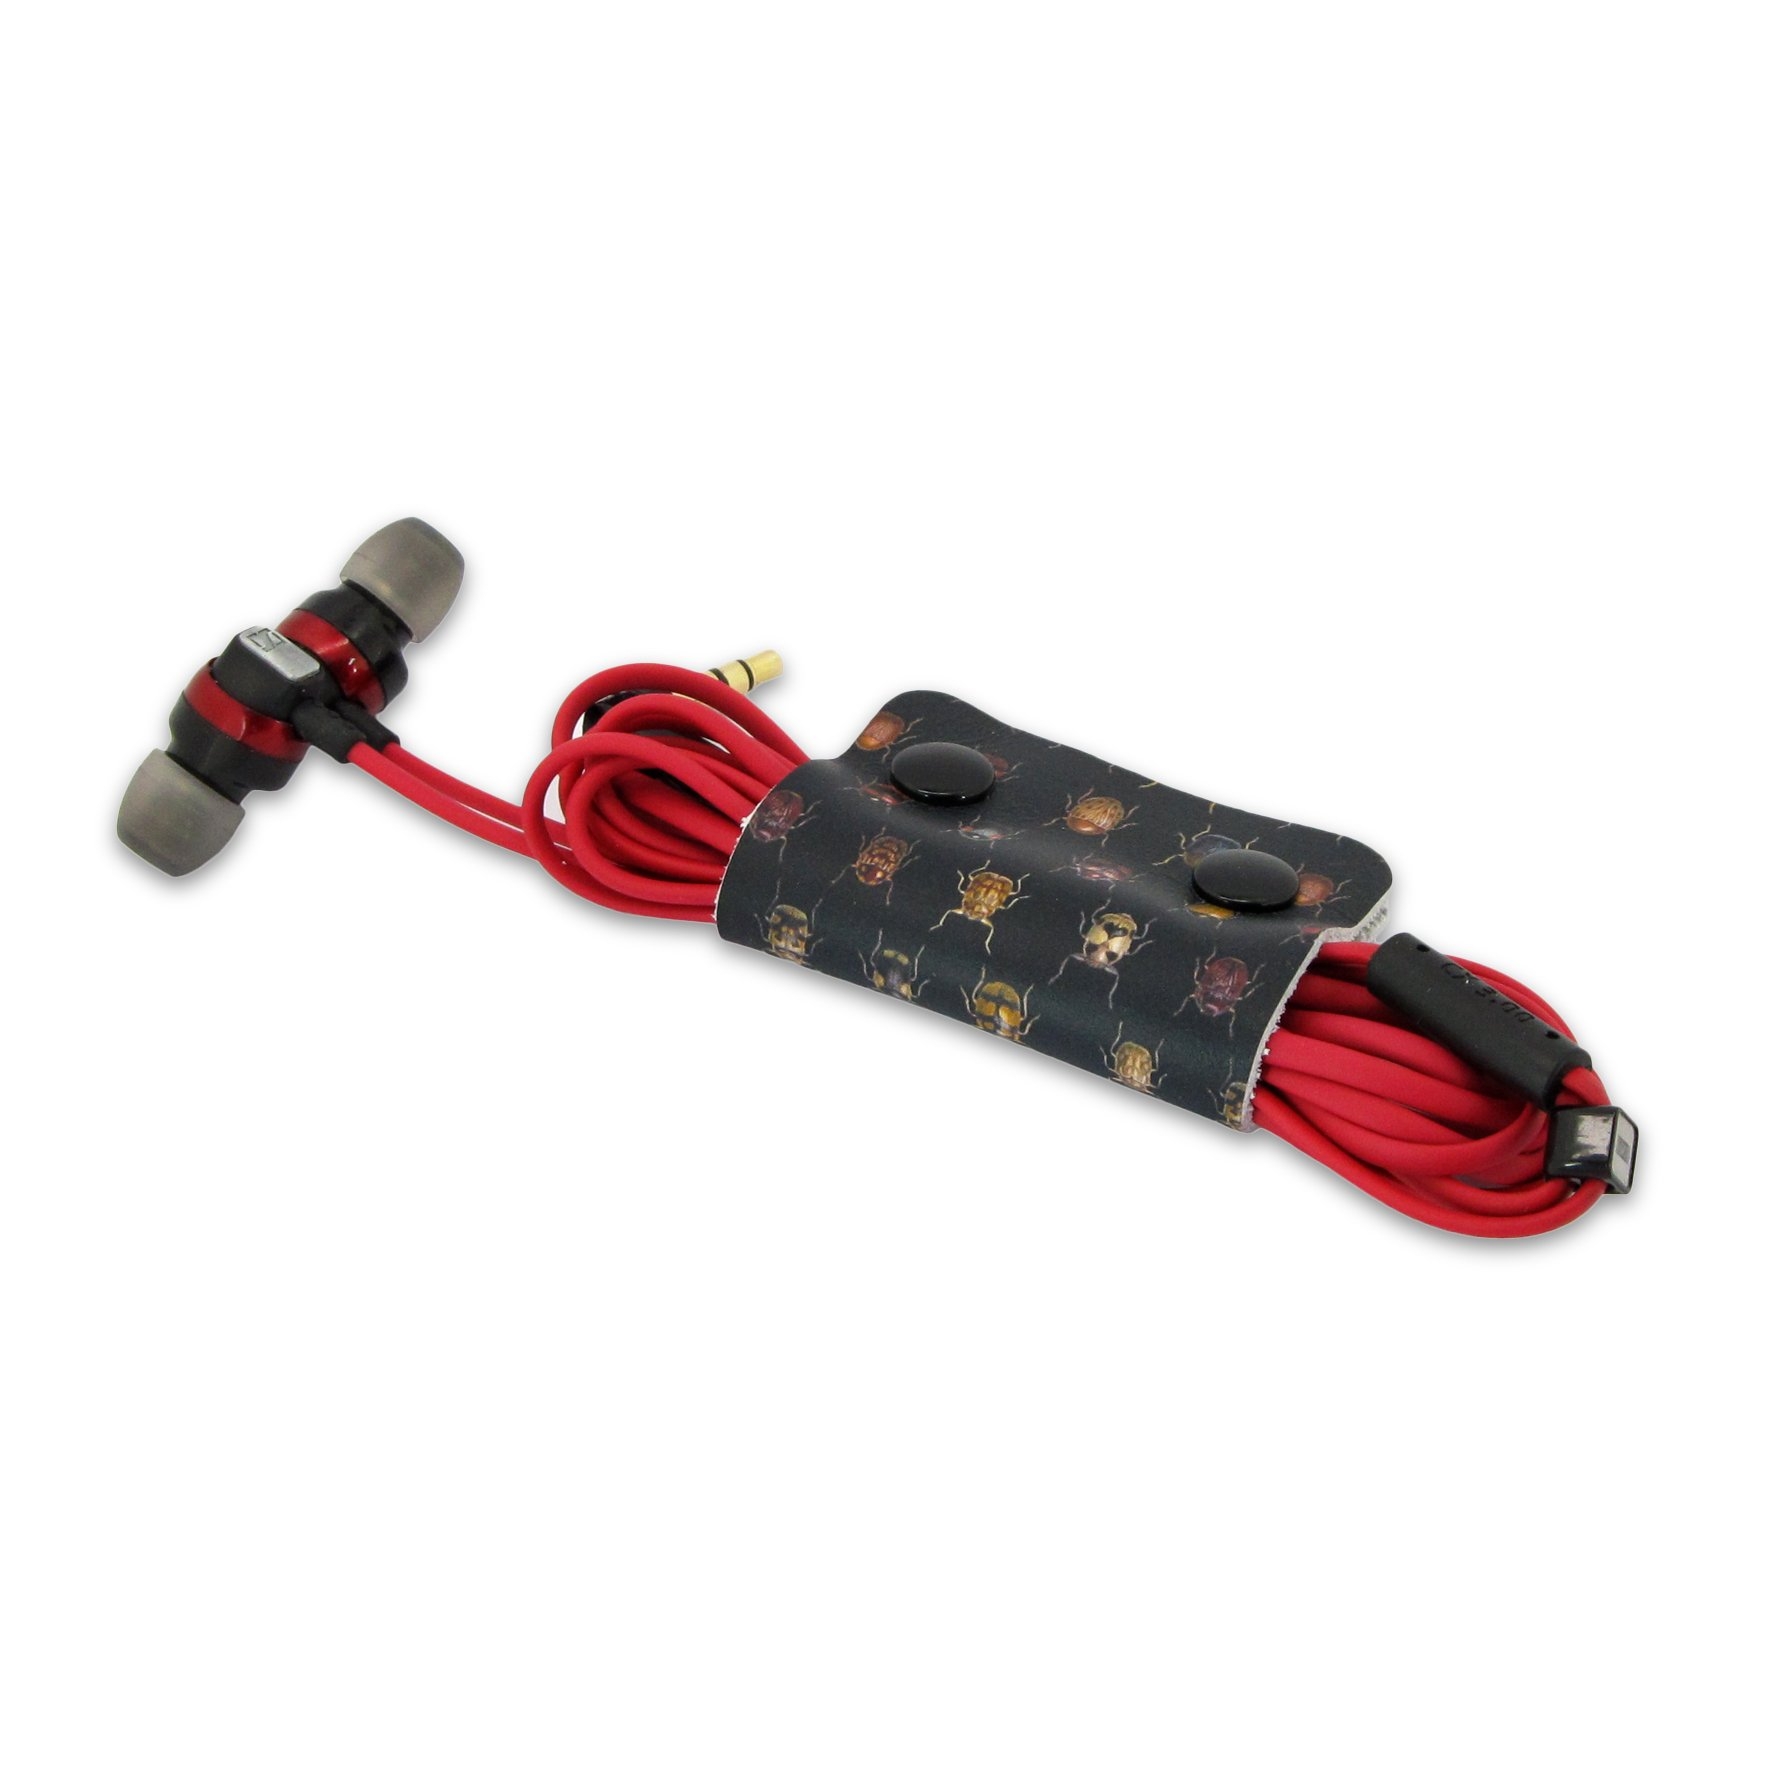 Leather Cable Tidy / Headphone Holder: Classic Wrap – Insects / 1 Single Cable Tidy / Multicolour